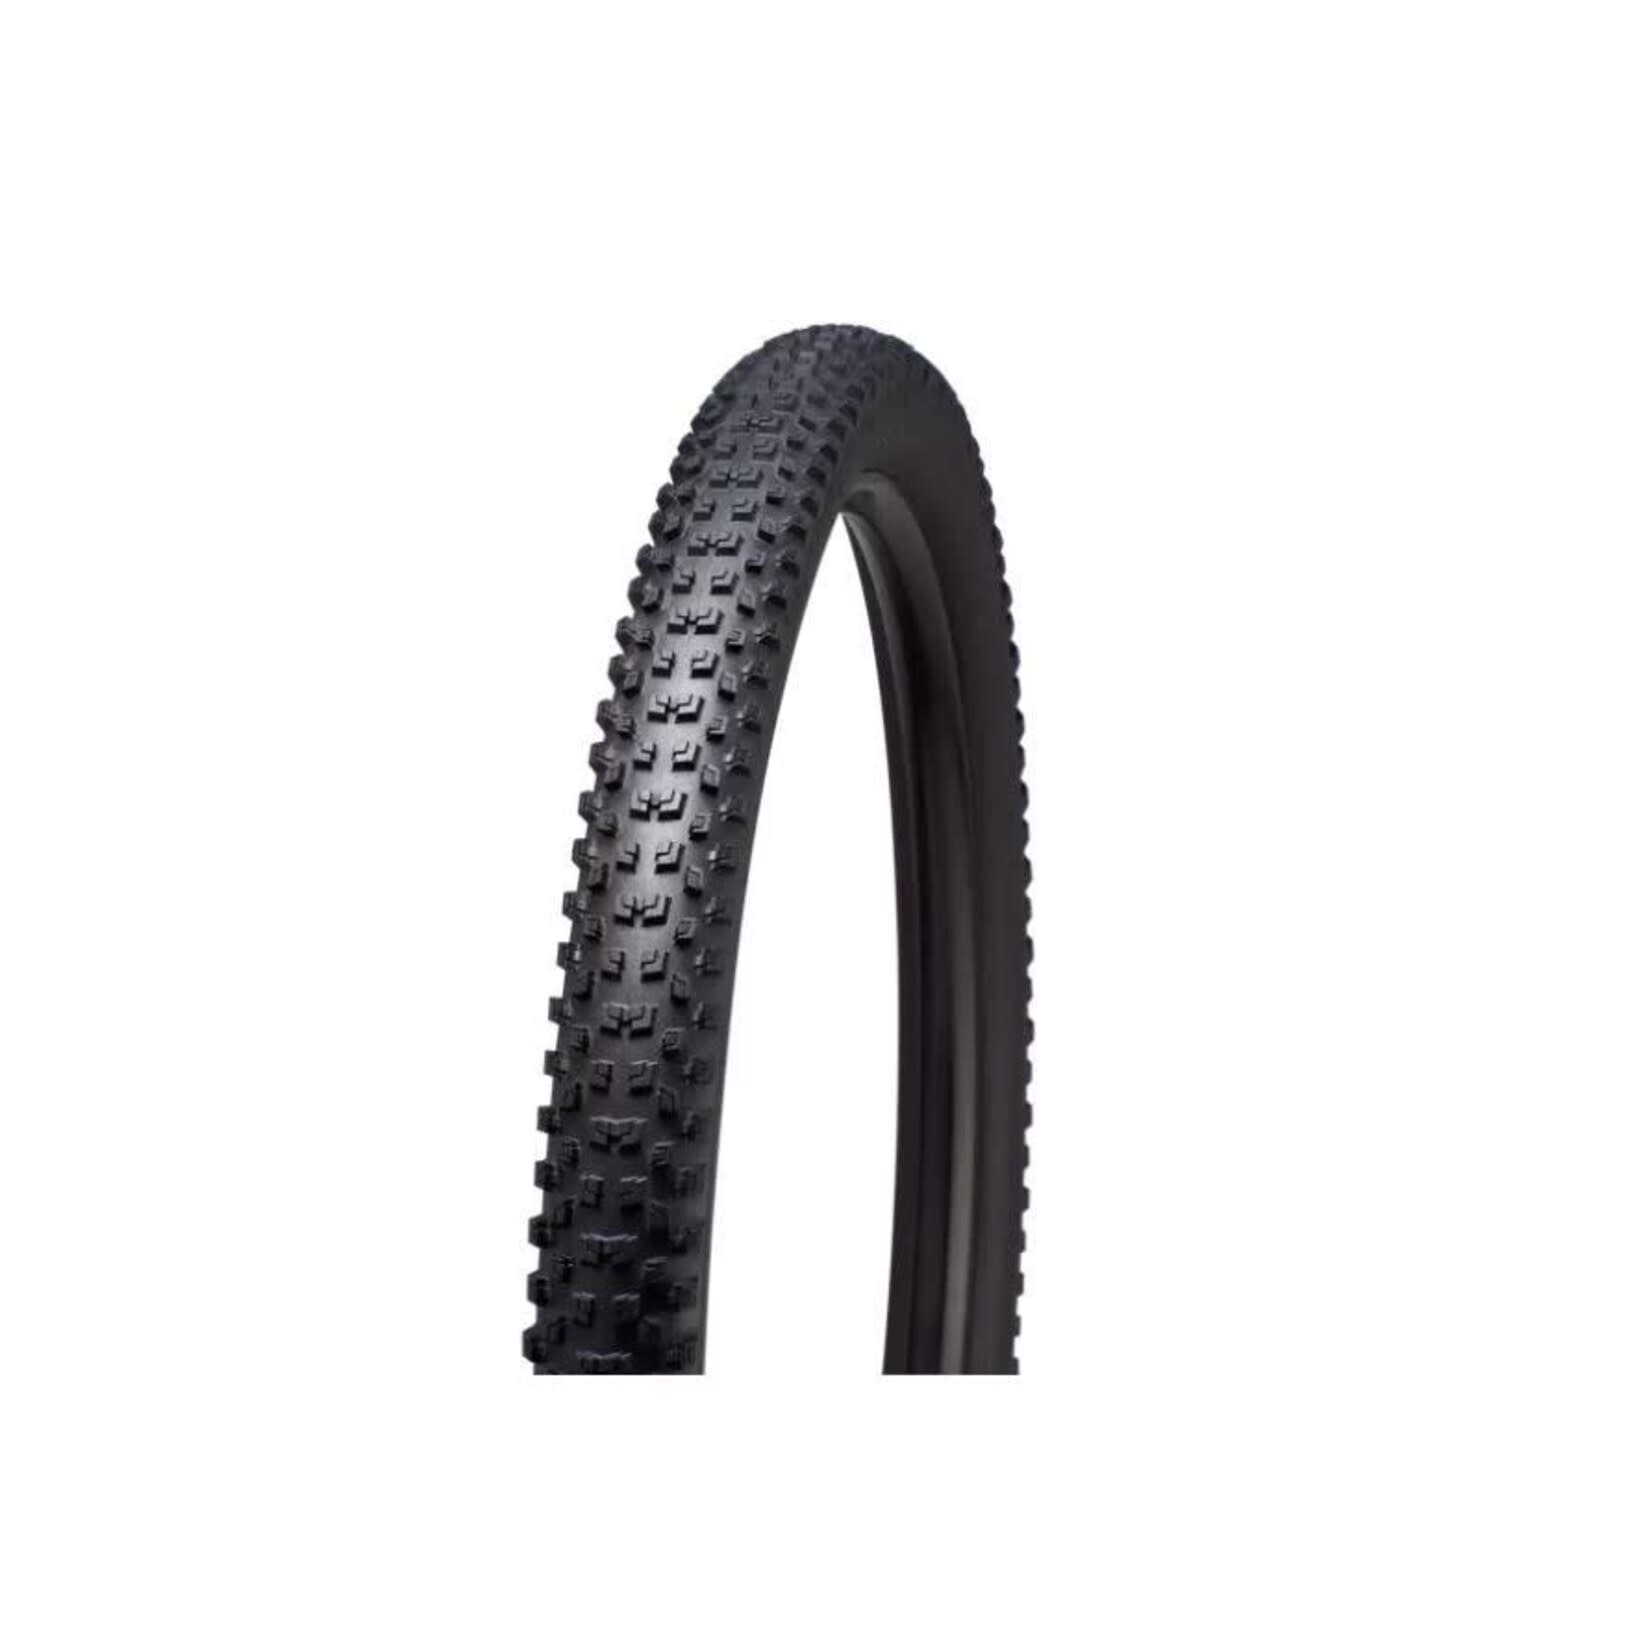 Specialized GROUND CONTROL GRID 2BR TIRE 27.5 x 3.0